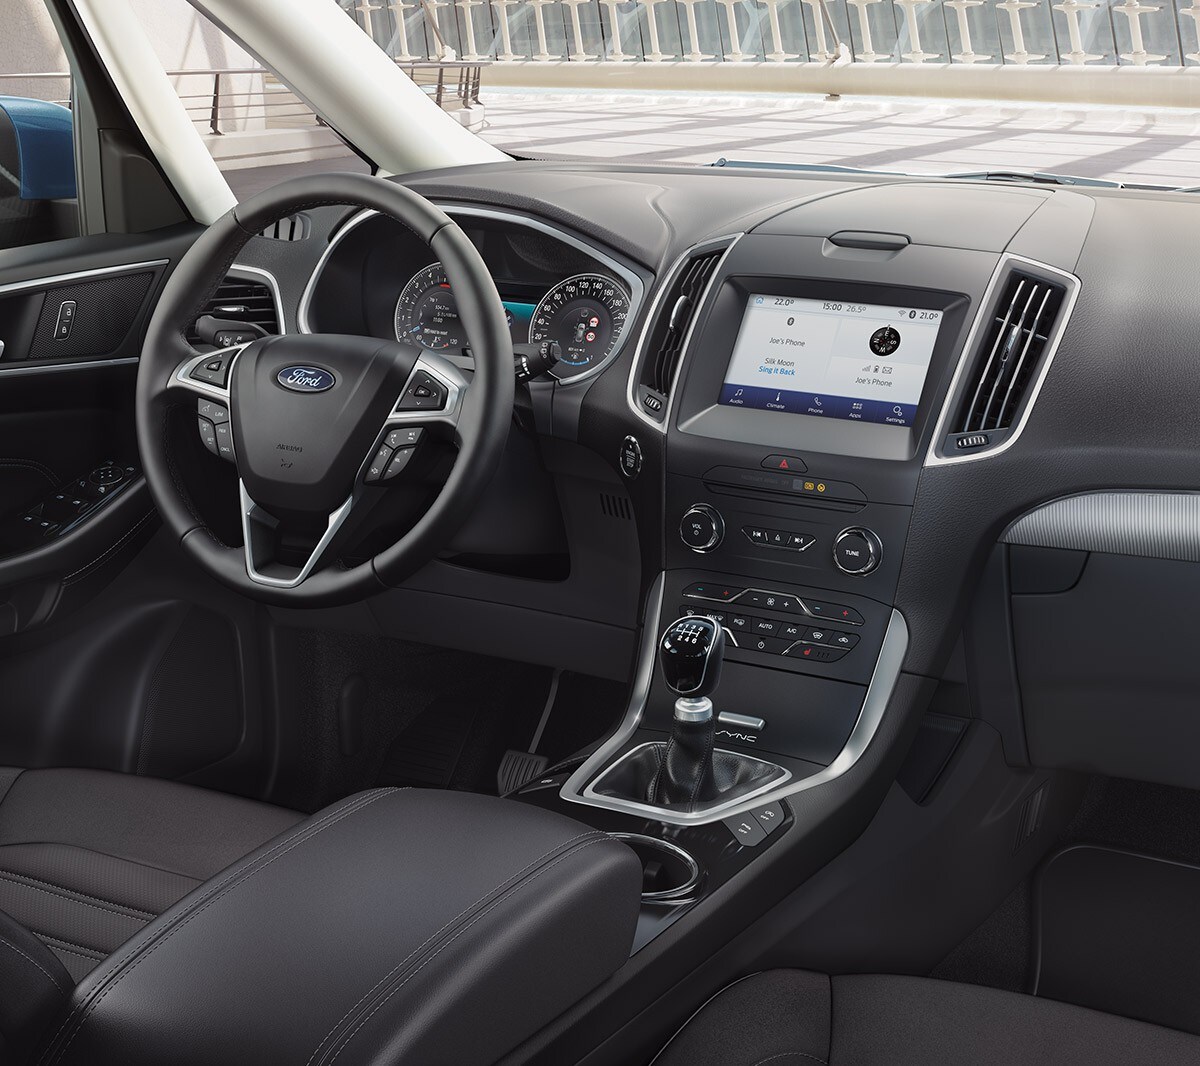 Ford Galaxy interior from front passenger's view